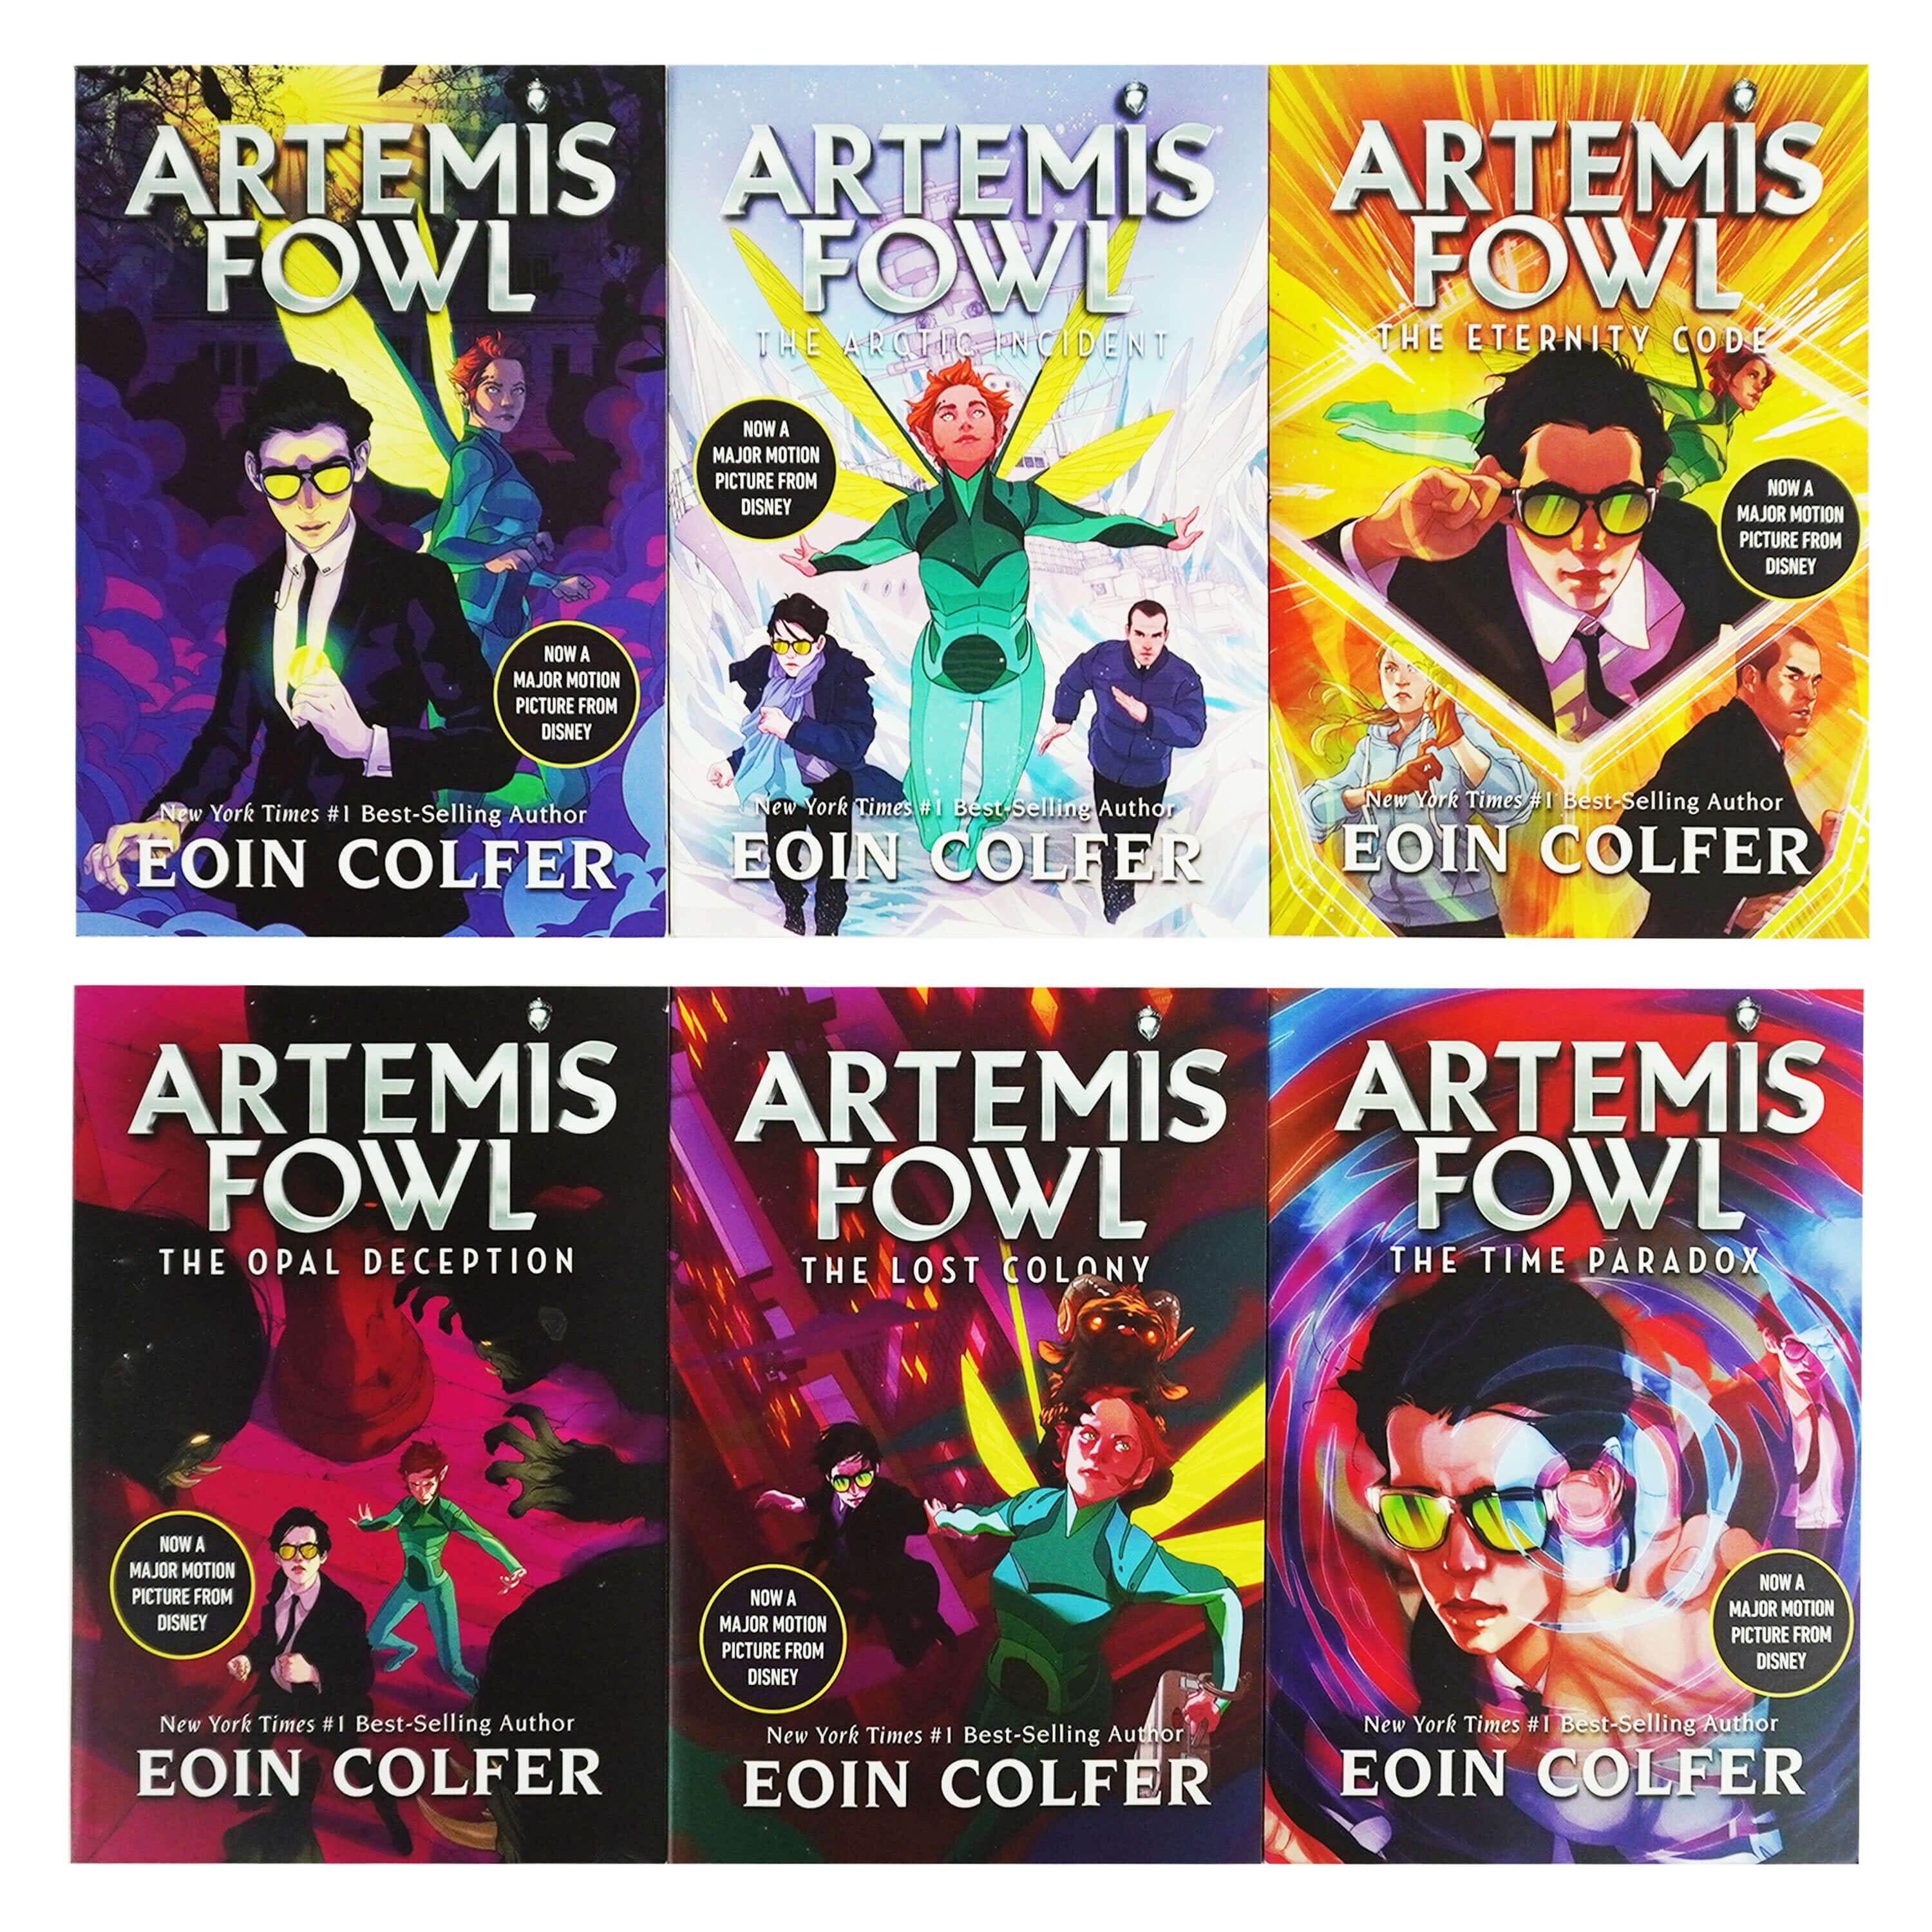 Disney Time Paradox, The-Artemis Fowl, Book 6 - by Eoin Colfer (Paperback)